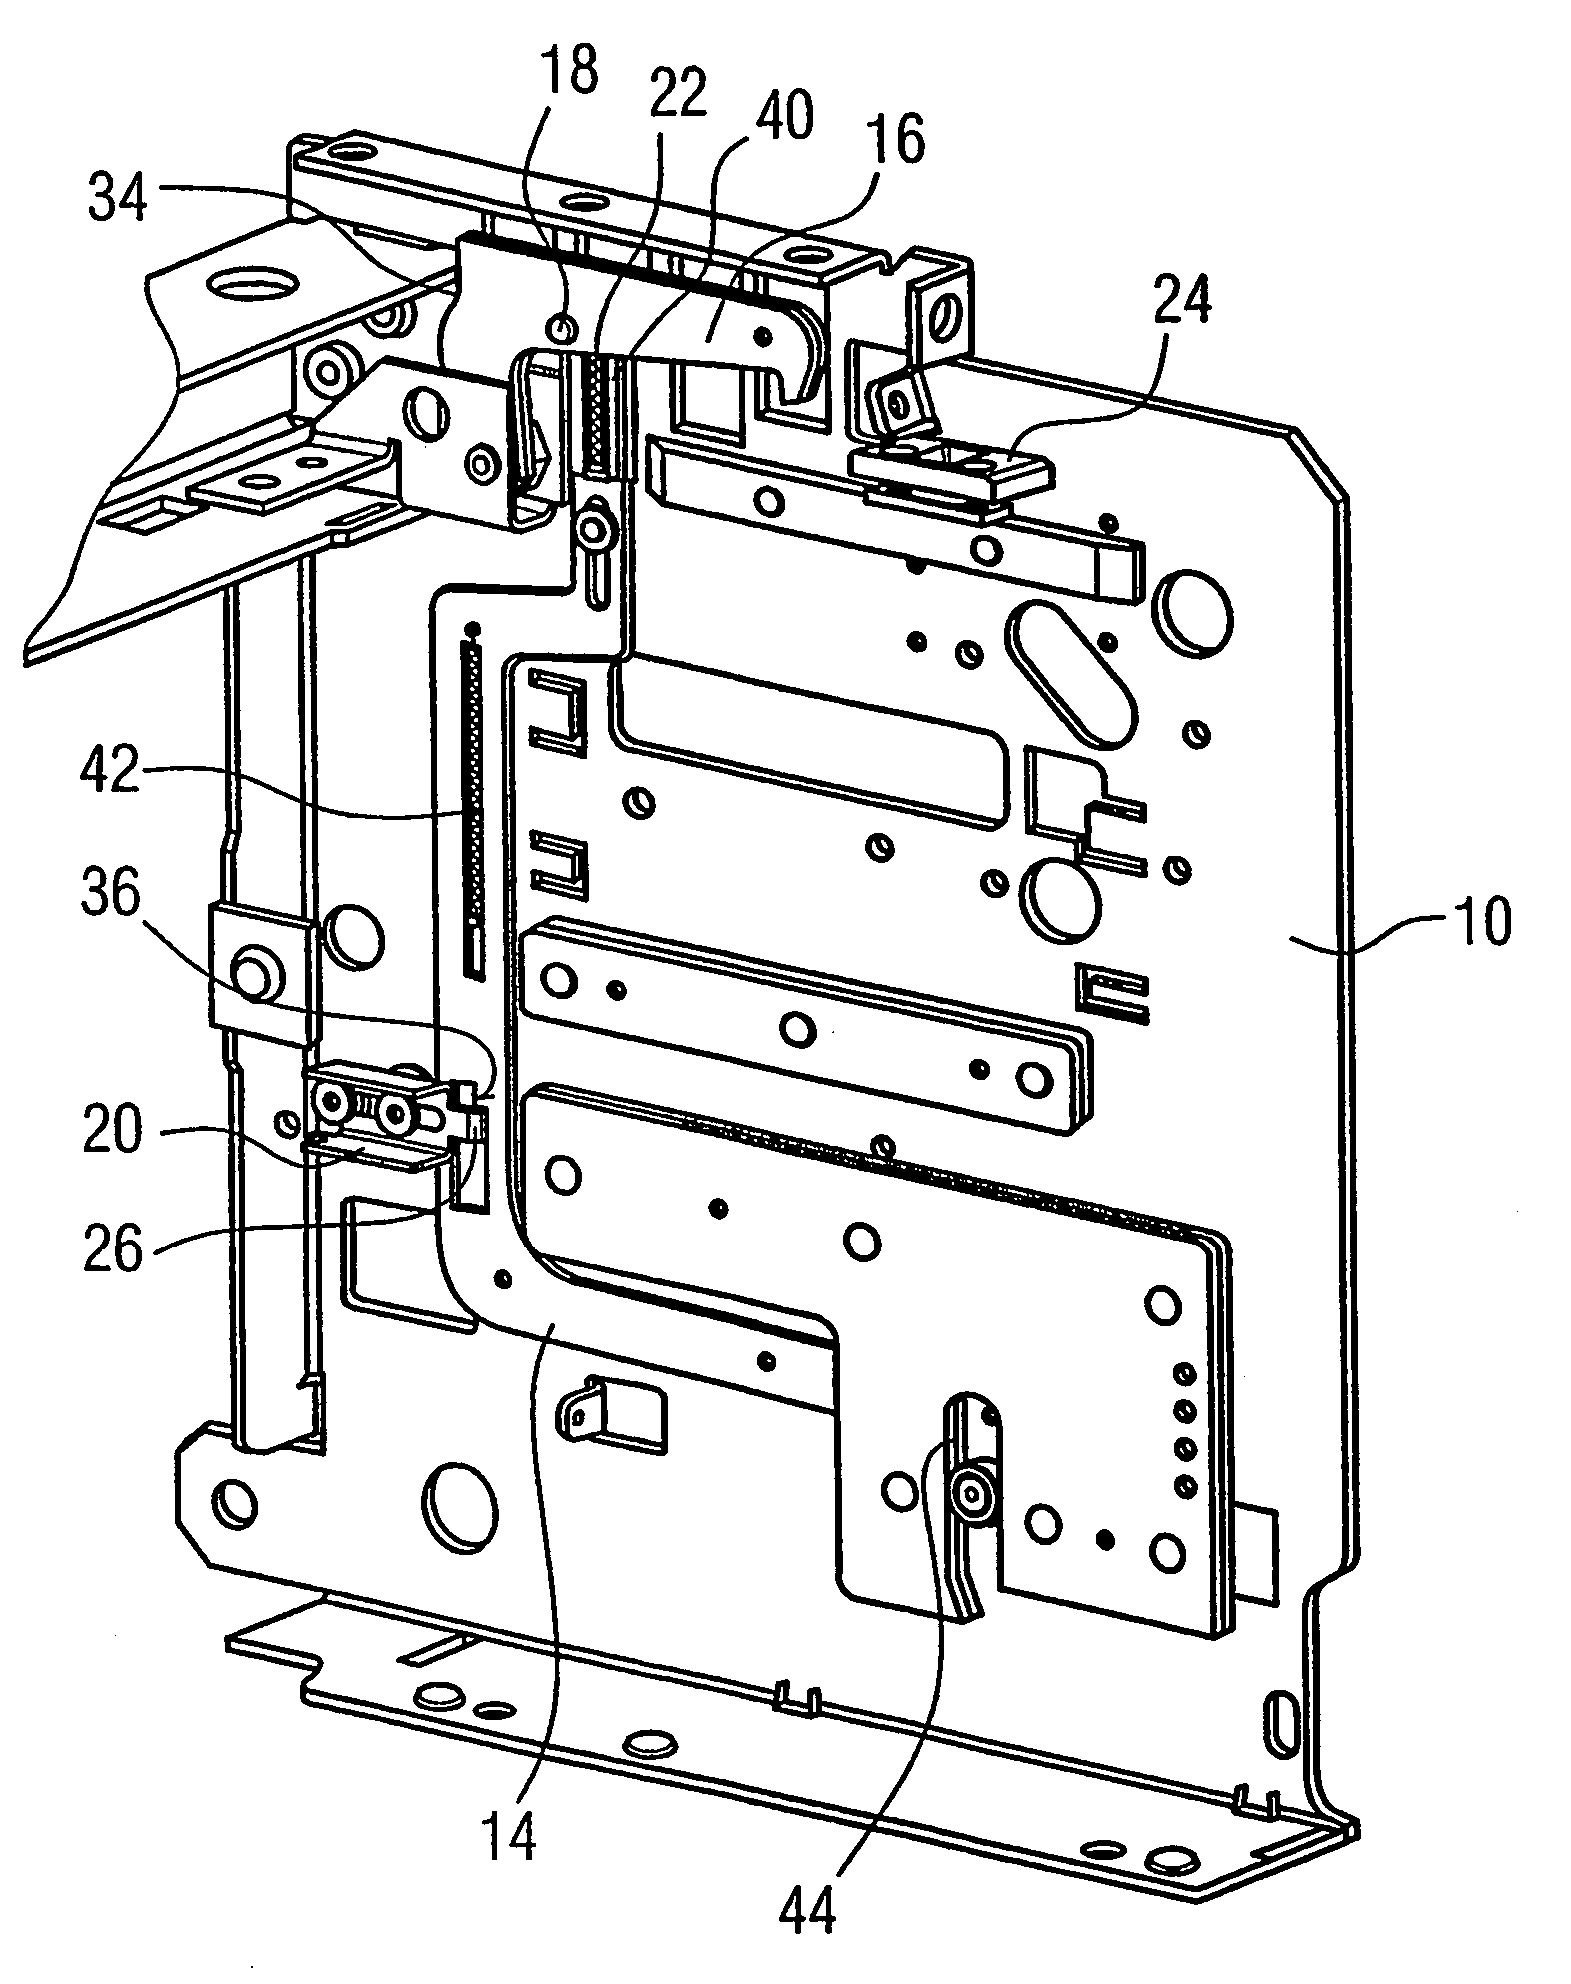 Device for fixing a power circuit breaker in an insertion rack